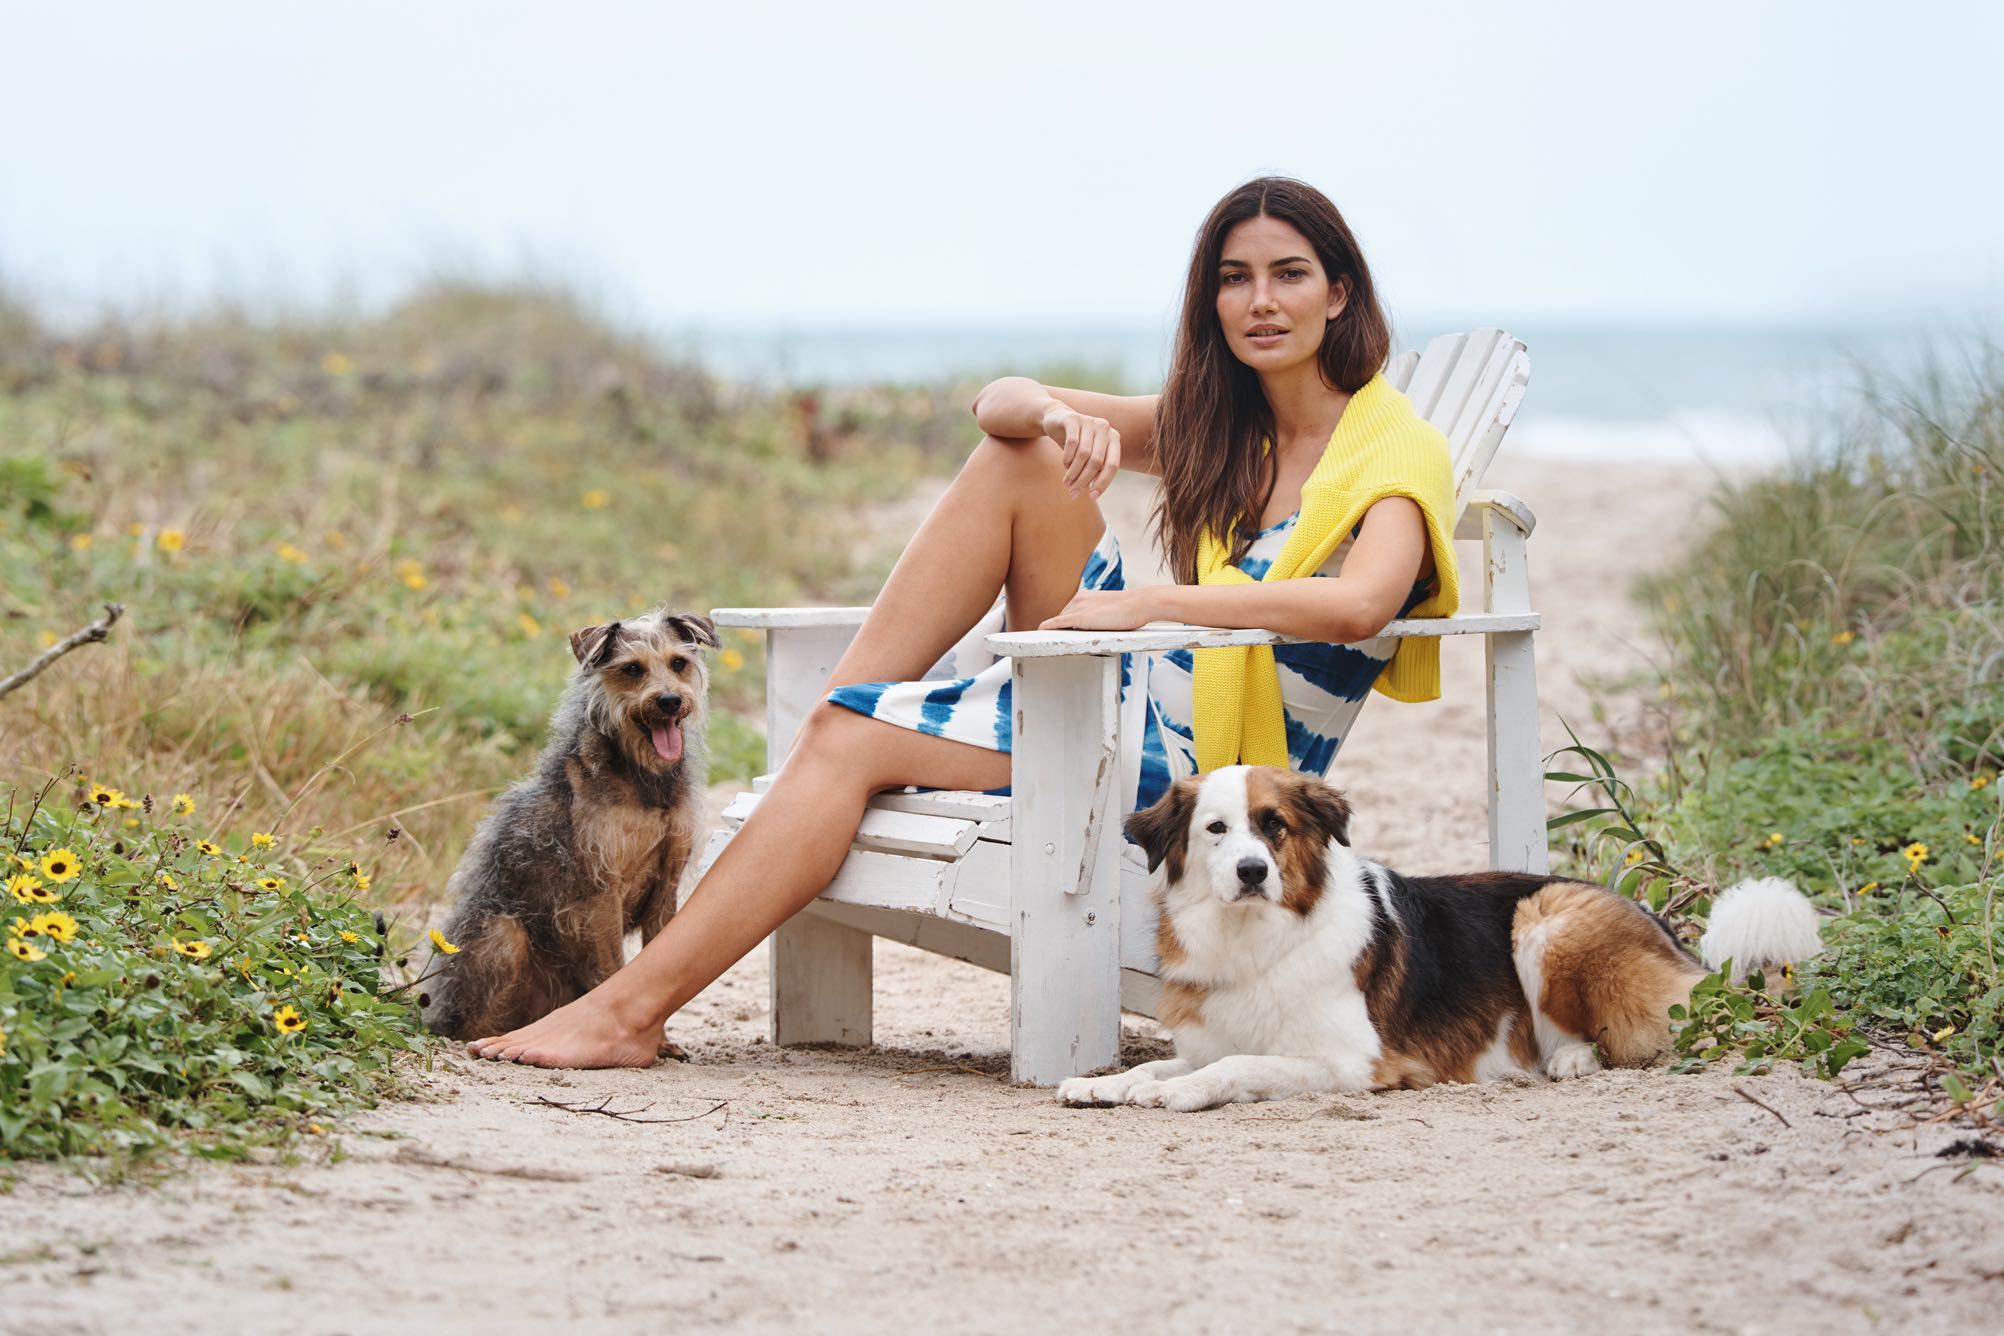 Woman in tie-dye dress sits on chair on beach with dogs.